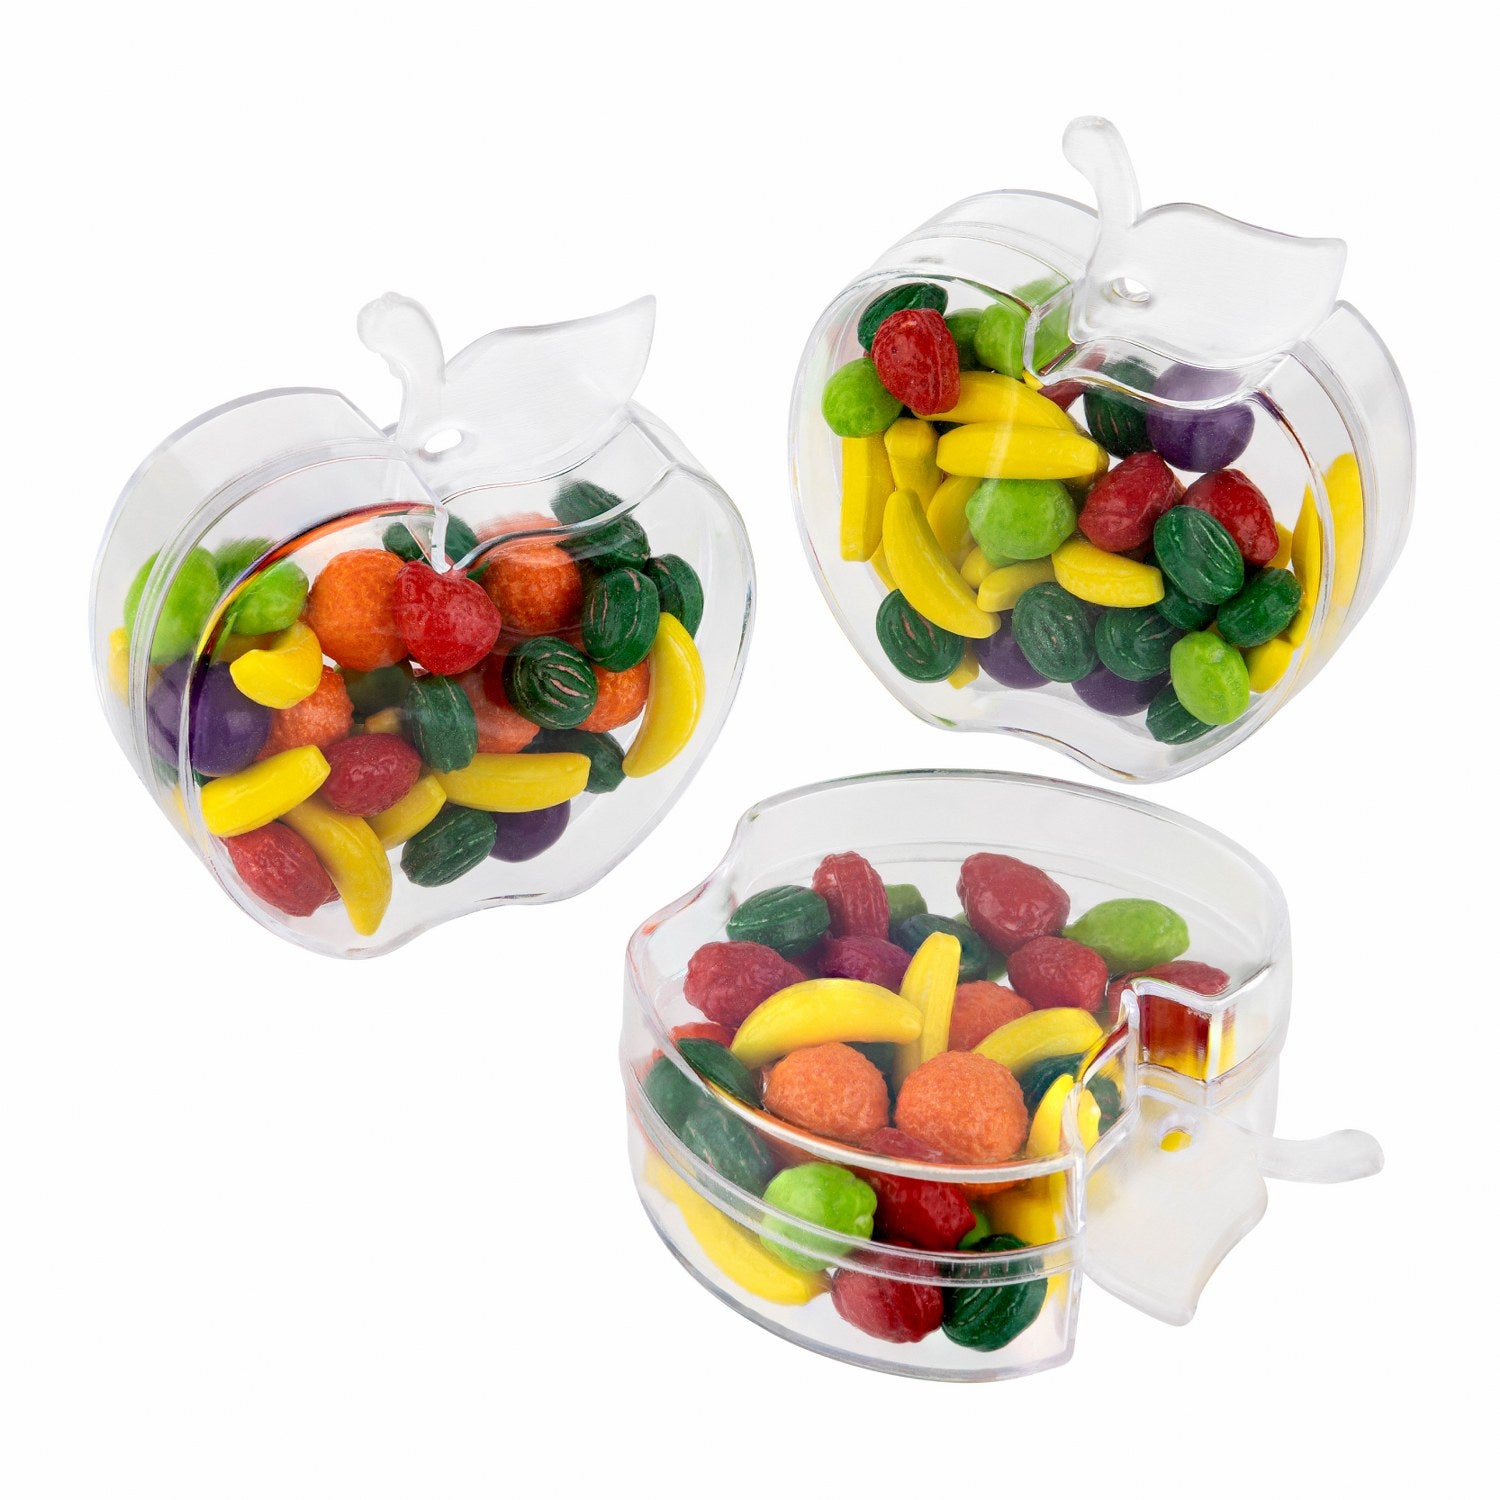 House Shaped Acrylic Candy Boxes 12 Pack 2.83X2.08X1.02